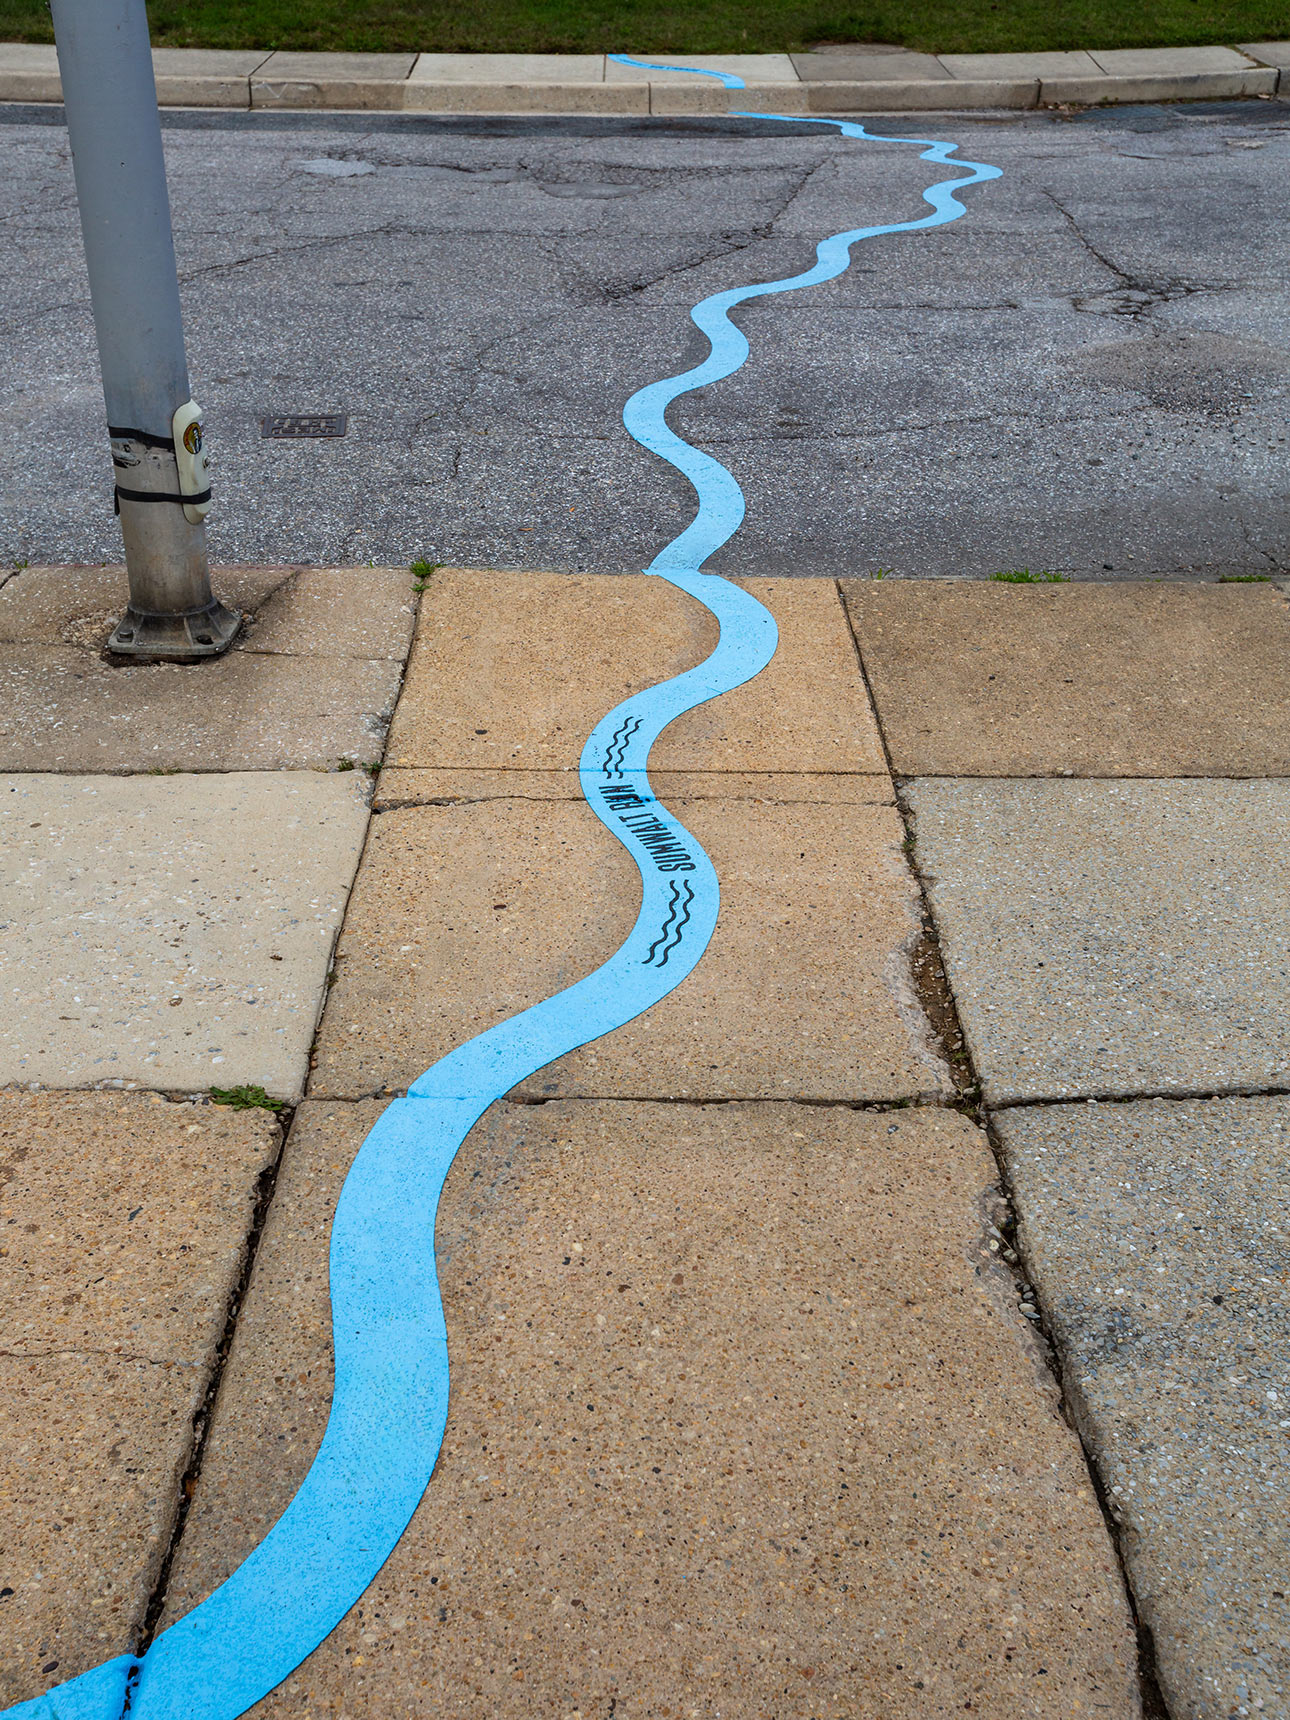 Photo of a public art installation mapping the path of an underground stream onto the pavement, showing a wide sidewalk and street, with a six-inch wide bright blue wavy line snaking all the way across to the grass on the other side. The words Sumwalt Run are imprinted onto the line.